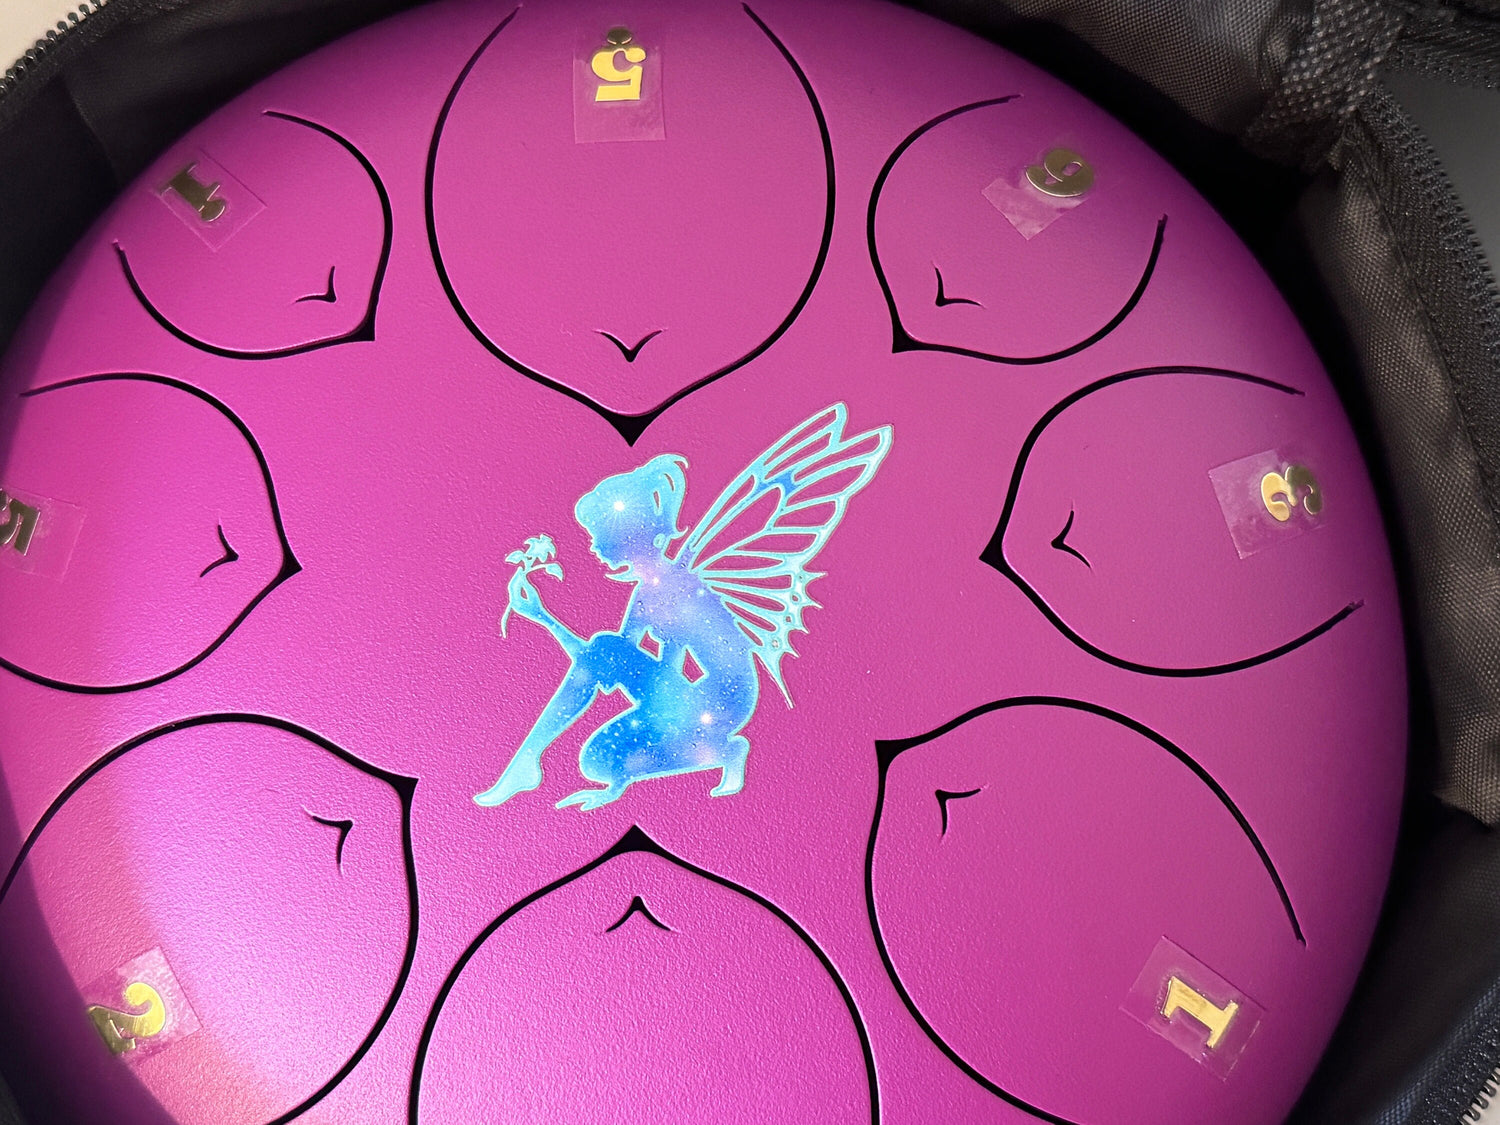 Fairy Fusion - 8" Steel Tongue Drum - F Key - Playfulness and Connection with Nature, Shamanic Drum, Ethereal Drum Vibration, Tank Drum